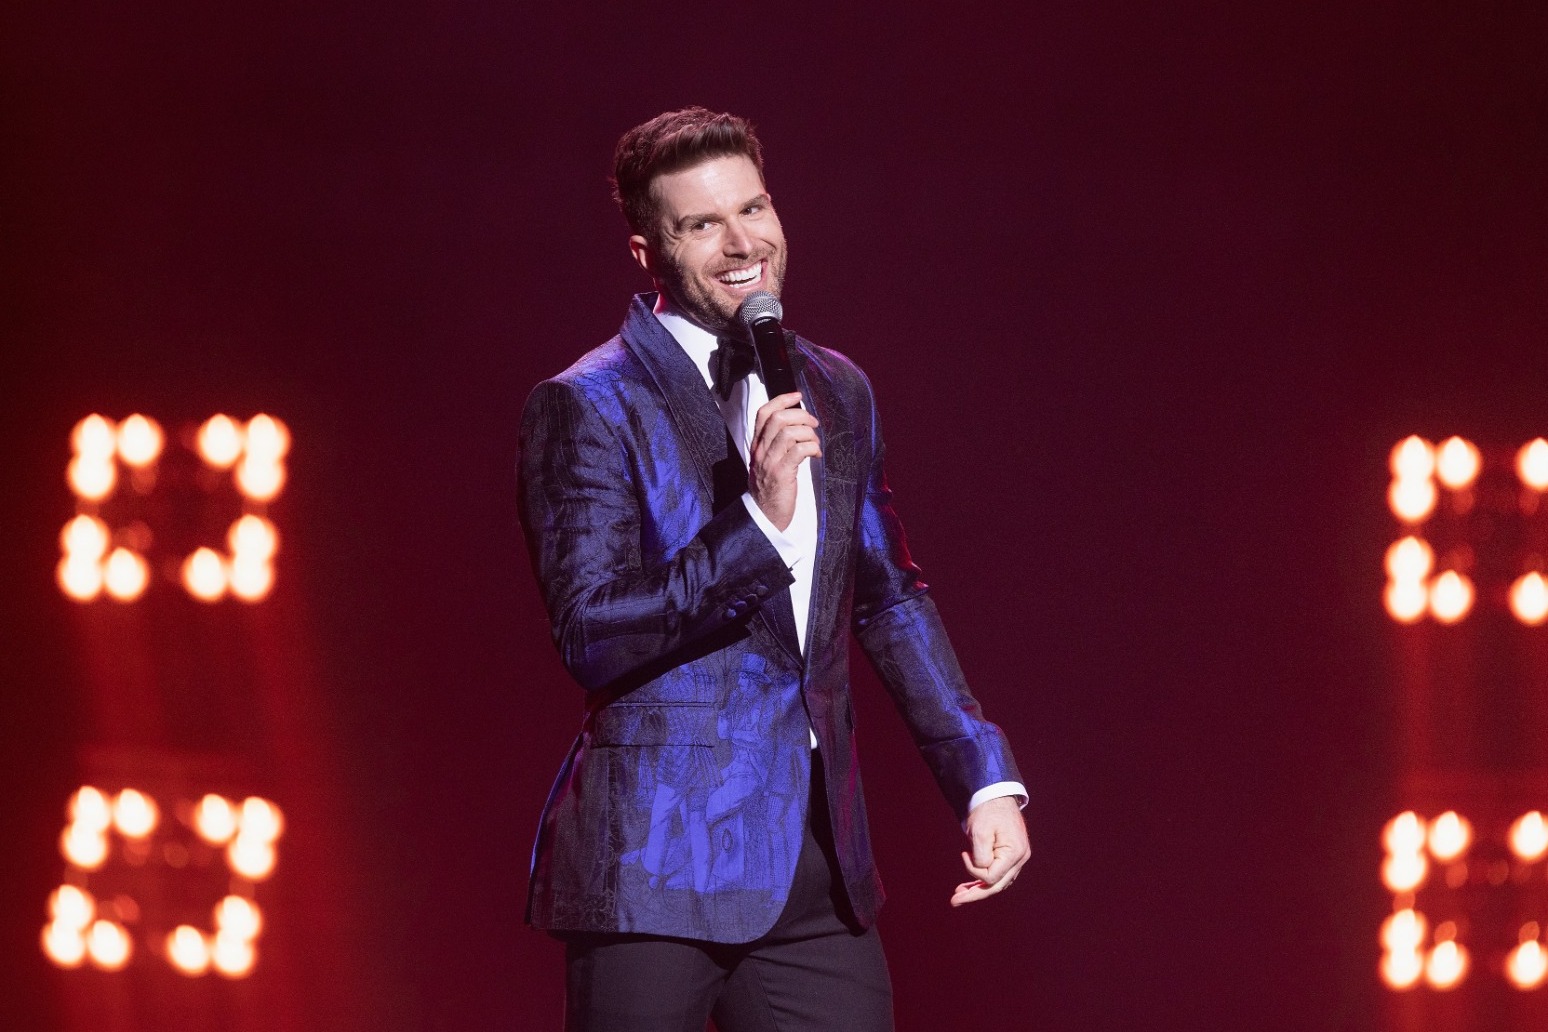 Joel Dommett: The hardest part of hosting NTAs is finding right line with script 